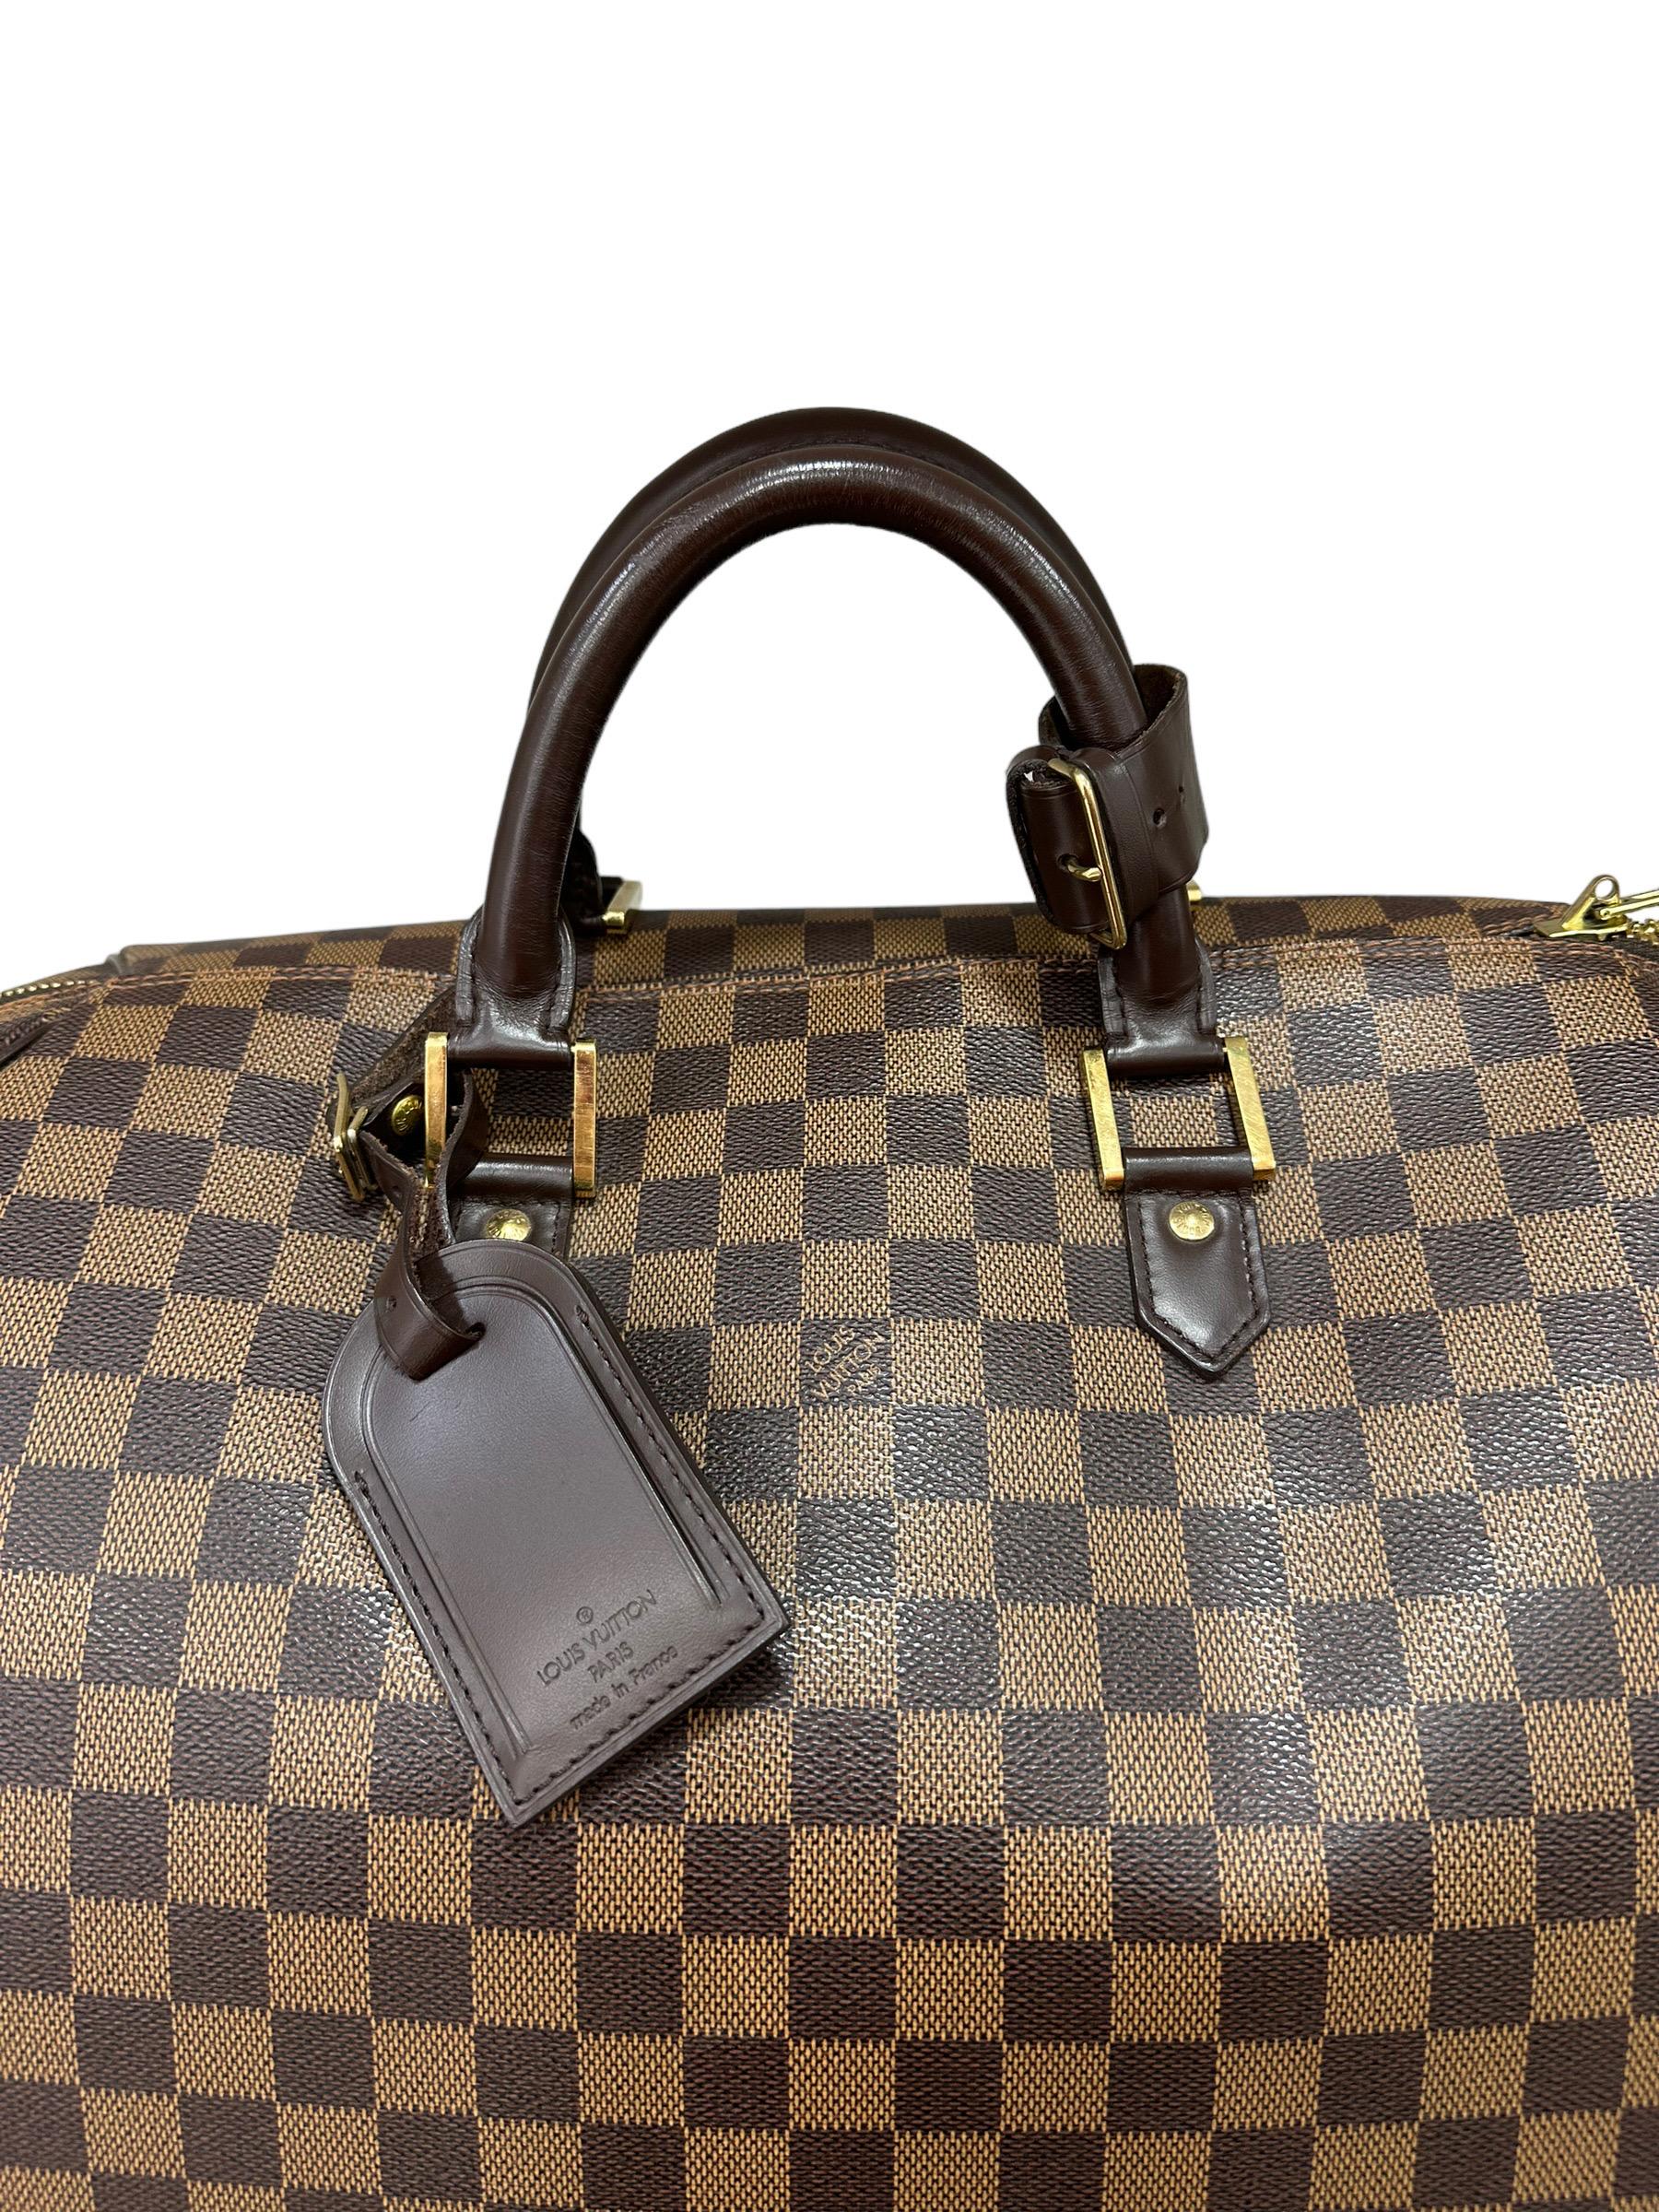 Louis Vuitton travel bag, Ribera model, size GM, made of brown canvas in the Damier ebene pattern, with brown leather trim and gold hardware. Equipped with a top zip closure, complete with padlock, keys and leather address holder. Fitted with a